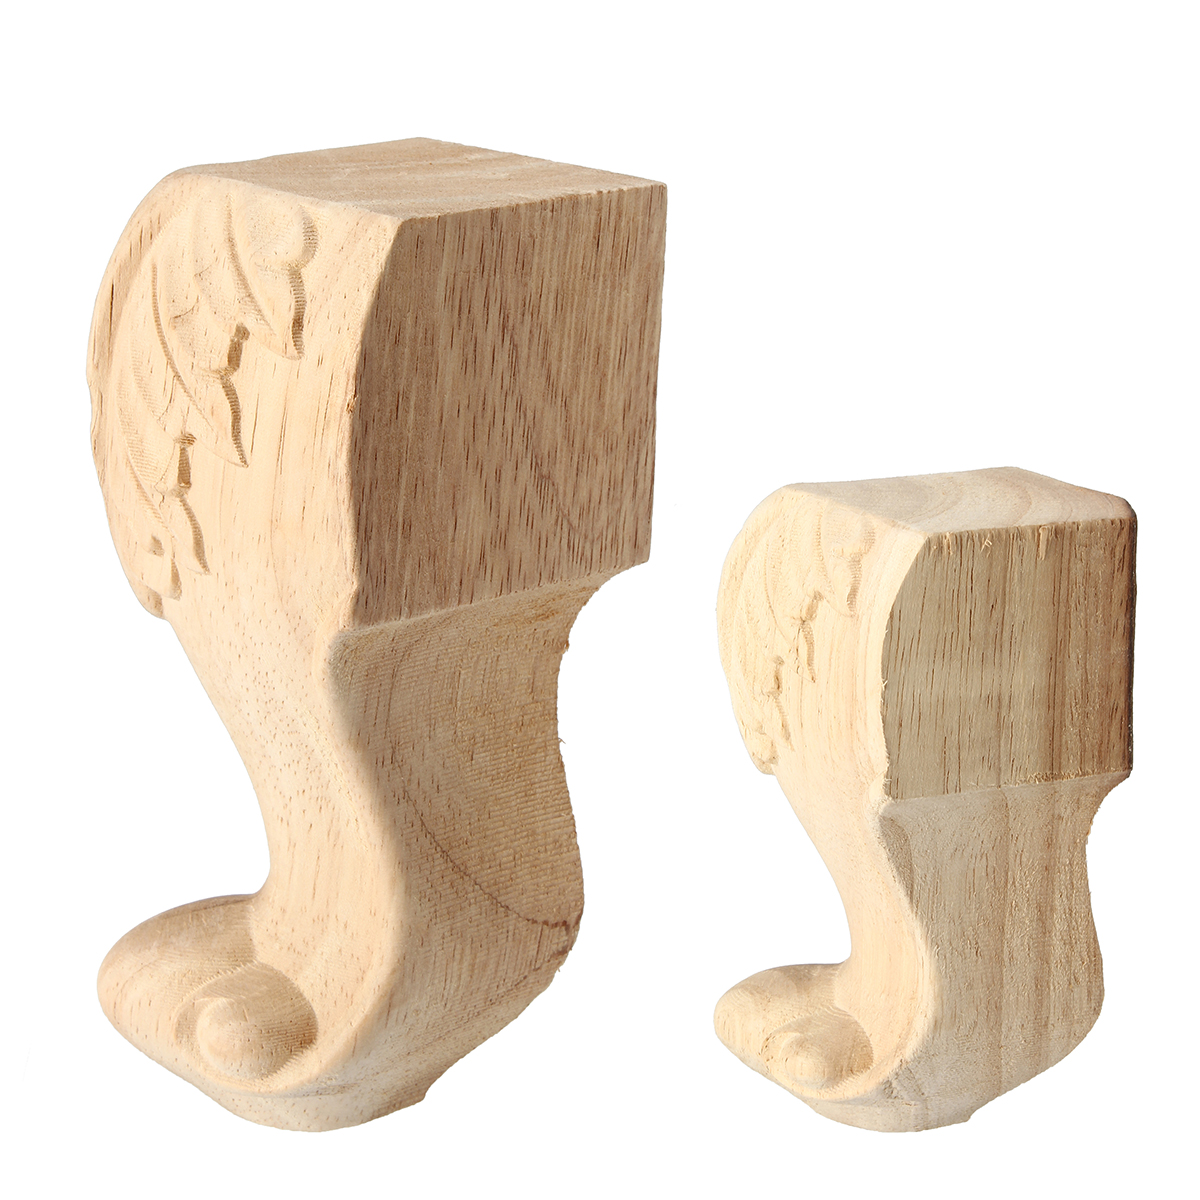 4Pcs-1015cm-European-Solid-Wood-Applique-Carving-Furniture-Foot-Legs-Unpainted-Cabinet-Feets-Decal-1322685-2